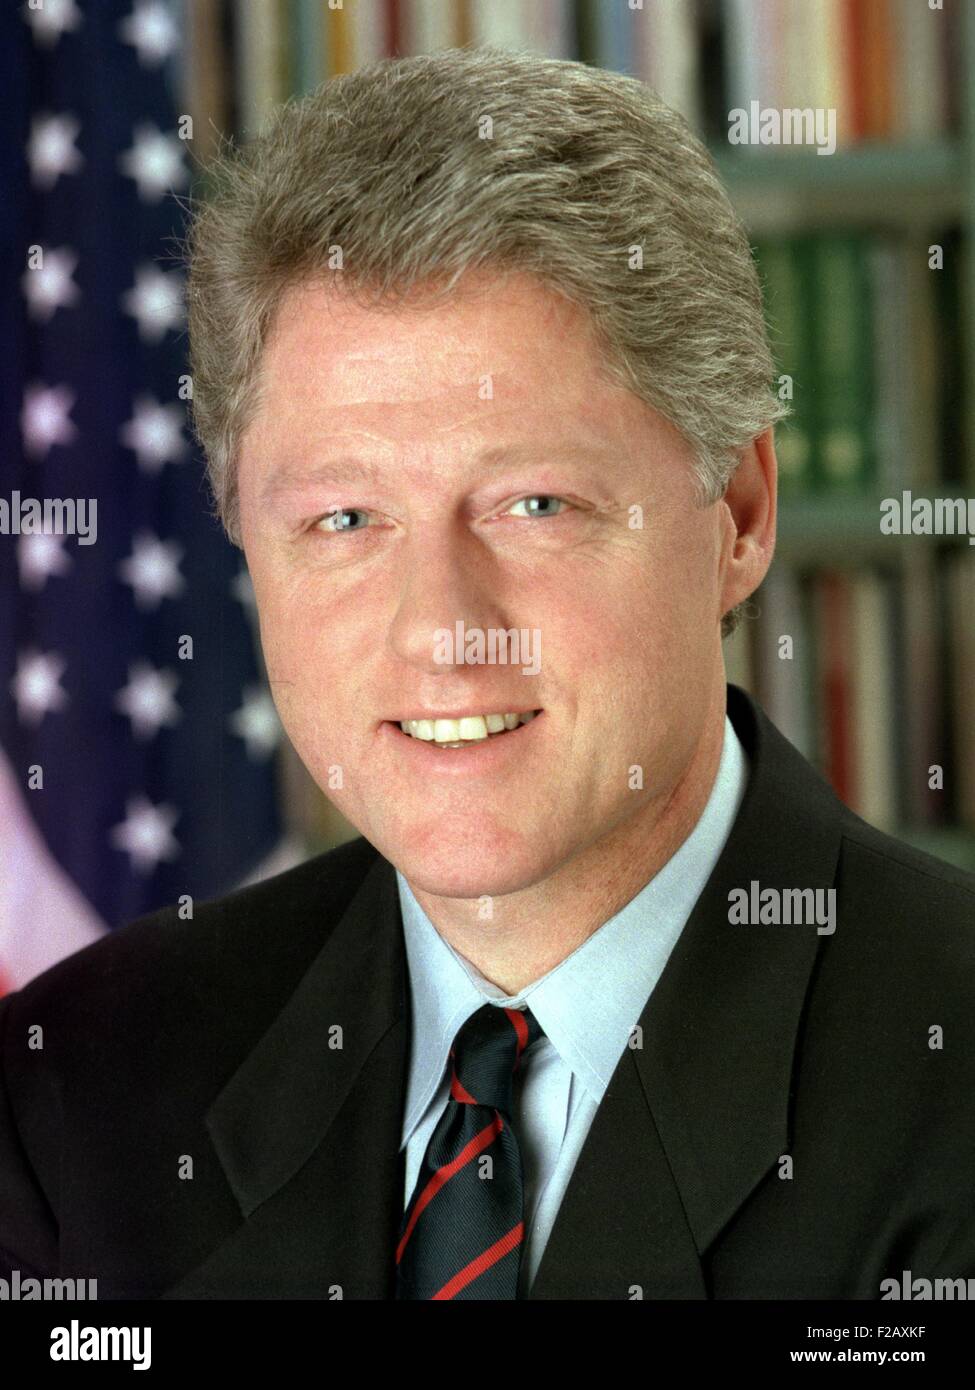 President Bill Clinton, January 1993. Official White House portrait by Bob McNeely. (BSLOC 2015 2 186) Stock Photo